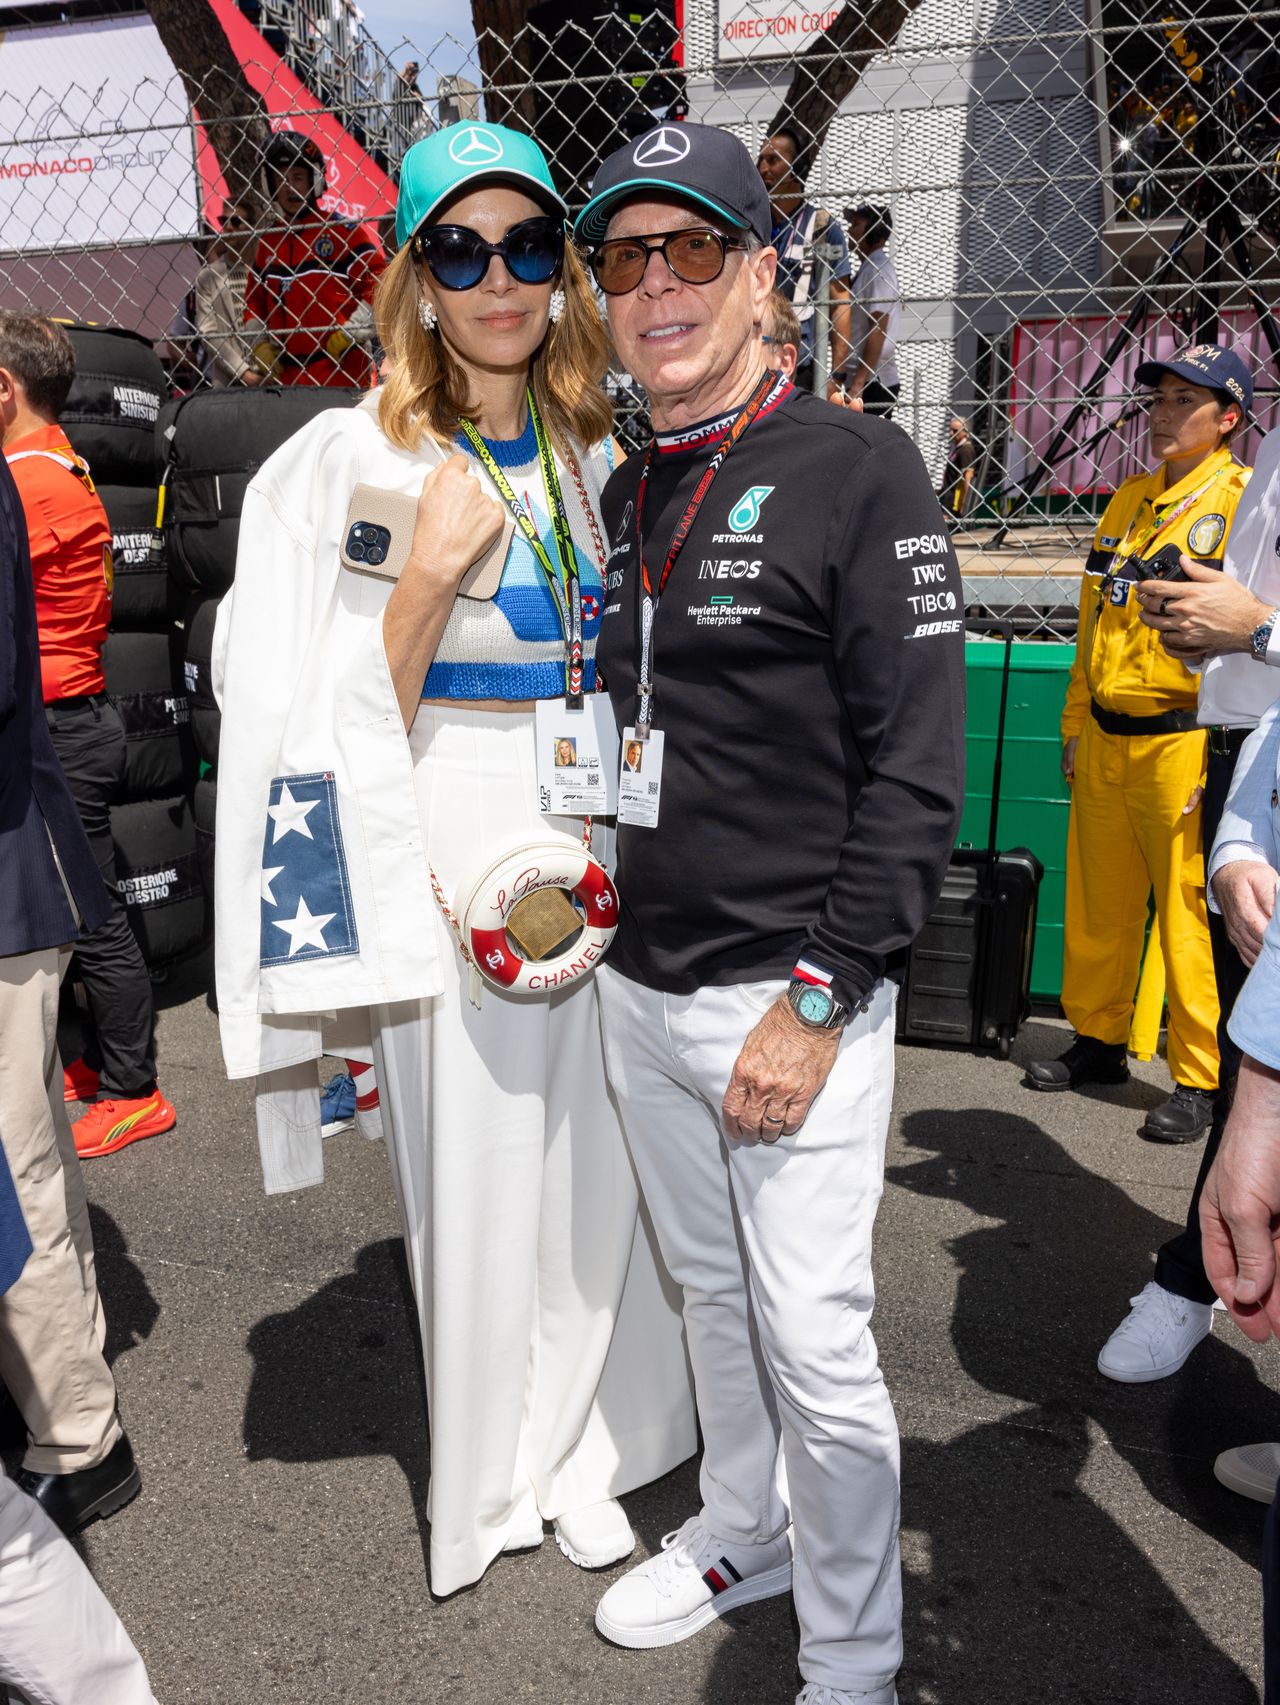 Tommy Hilfiger and Dee Ocleppo Hilfiger at the F1 races